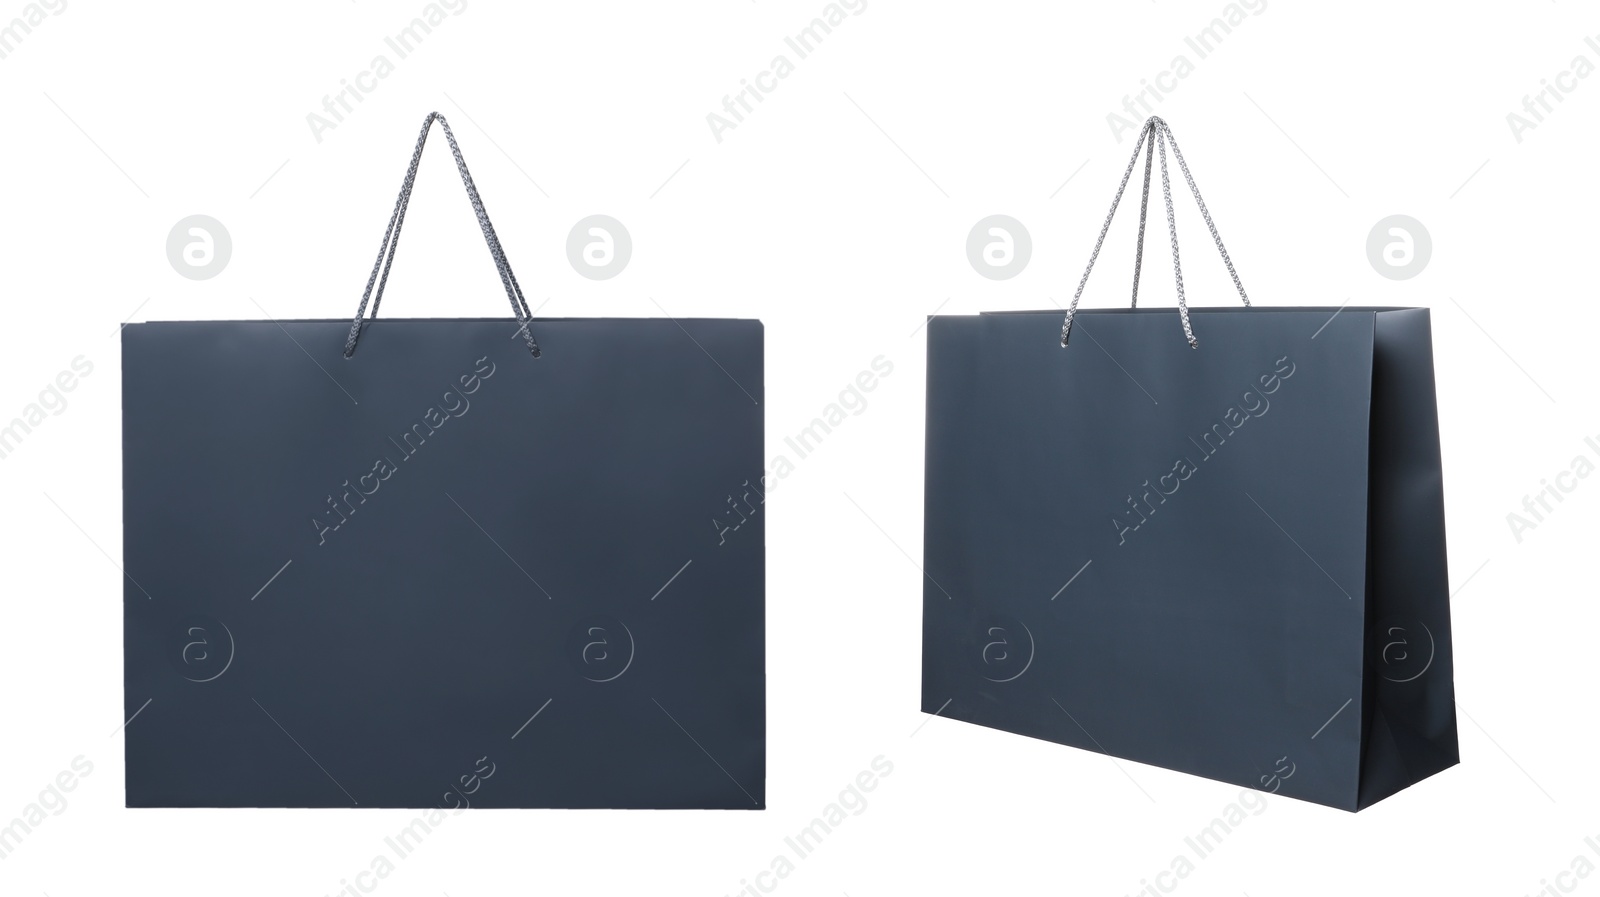 Image of Black shopping bag isolated on white, different sides